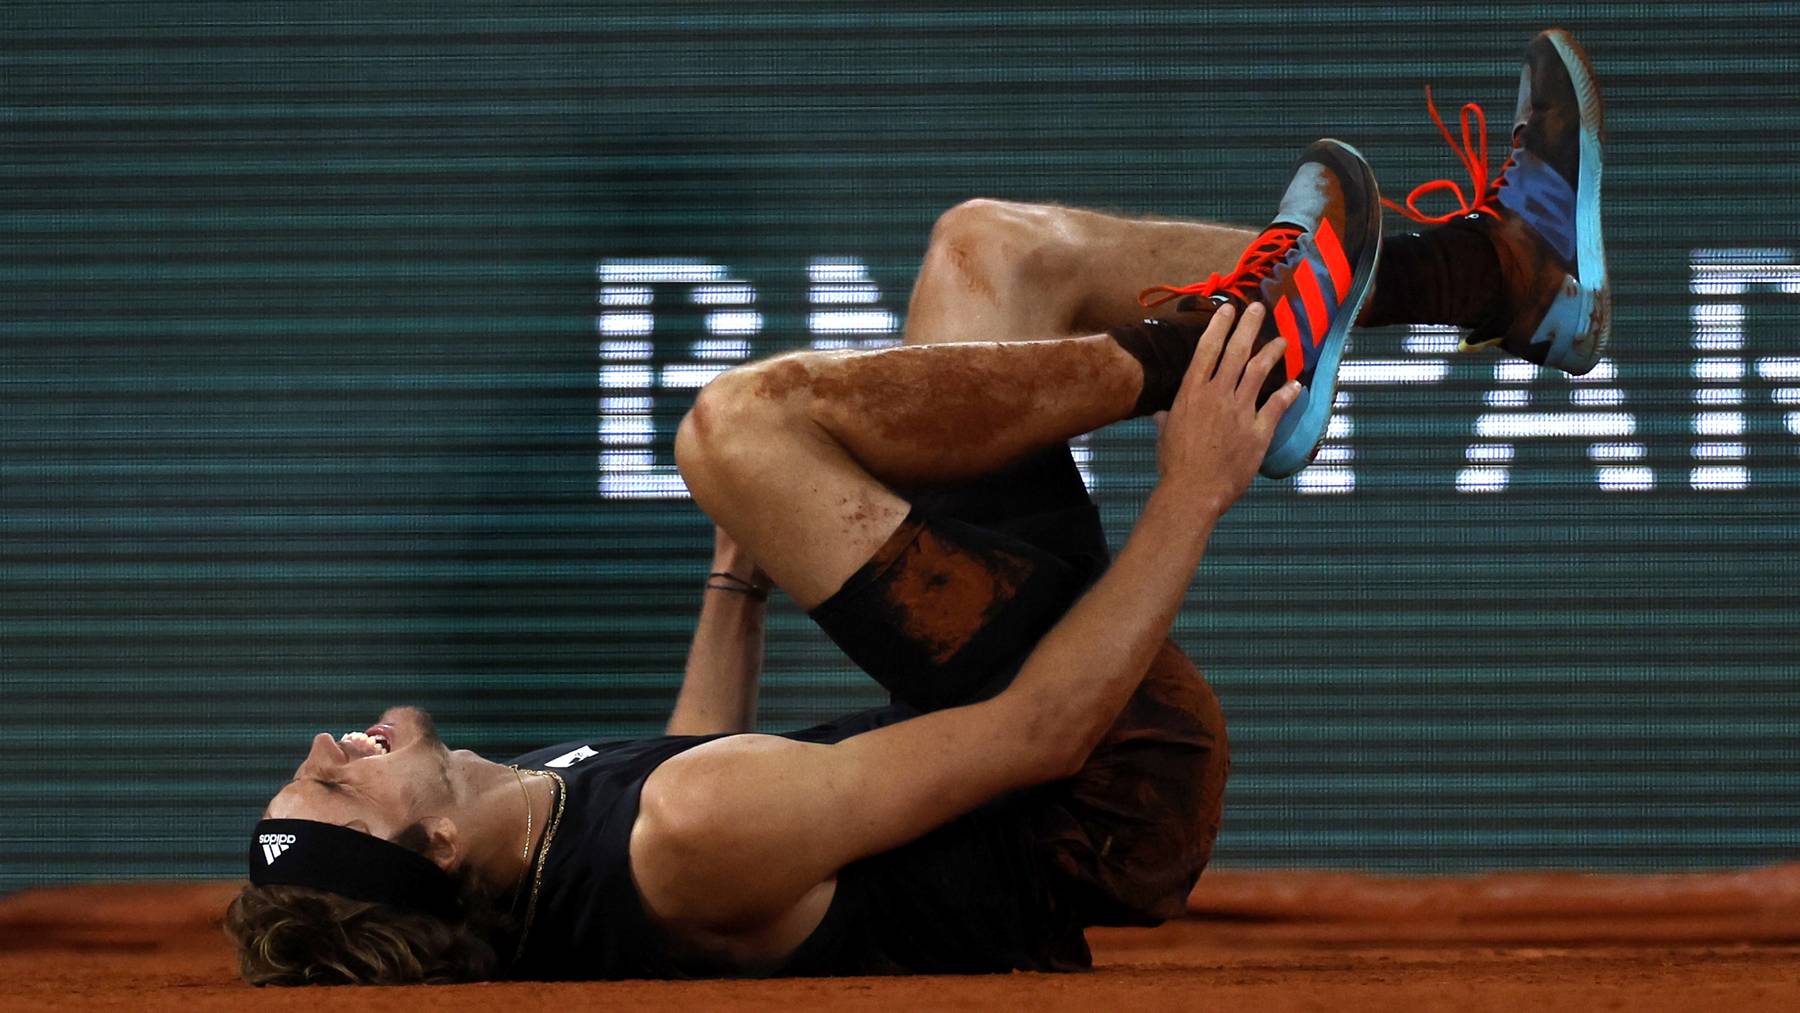 Alexander Zverev of Germany is injured on the court after falling in the men's semi-final match against Rafael Nadal of Spain during the French Open tennis tournament at Roland &#x200b;Garros in Paris, France, 03 June 2022.